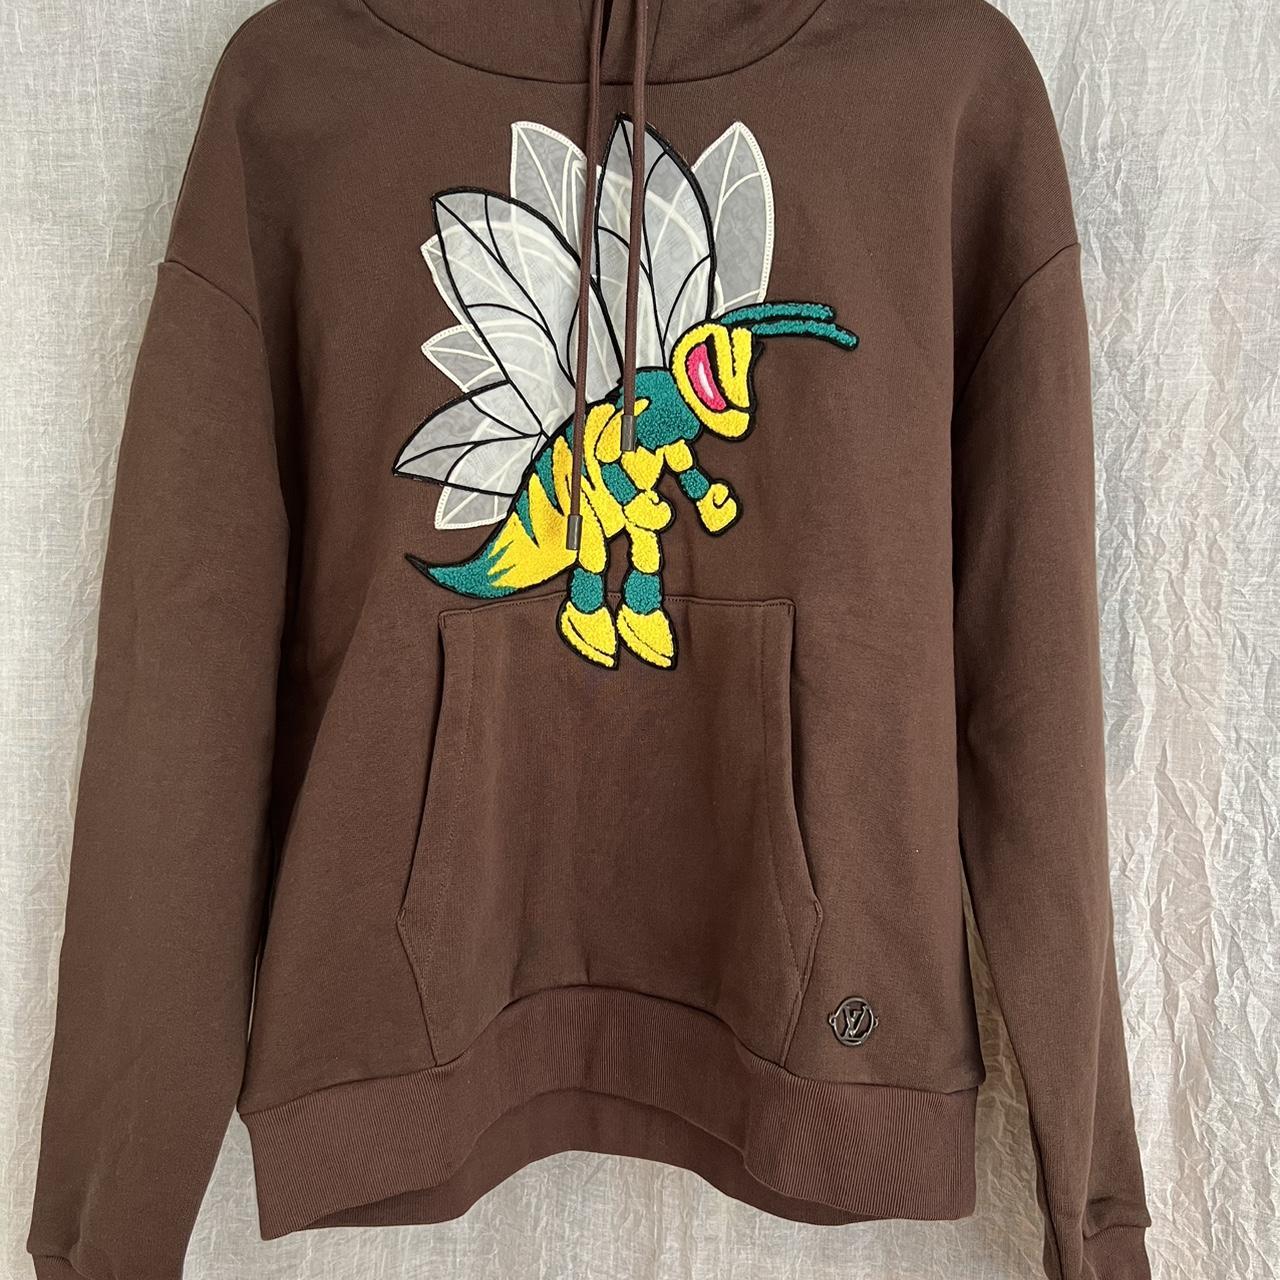 Louis Vuitton Graphic Bee Patched Hoodie brown sz M